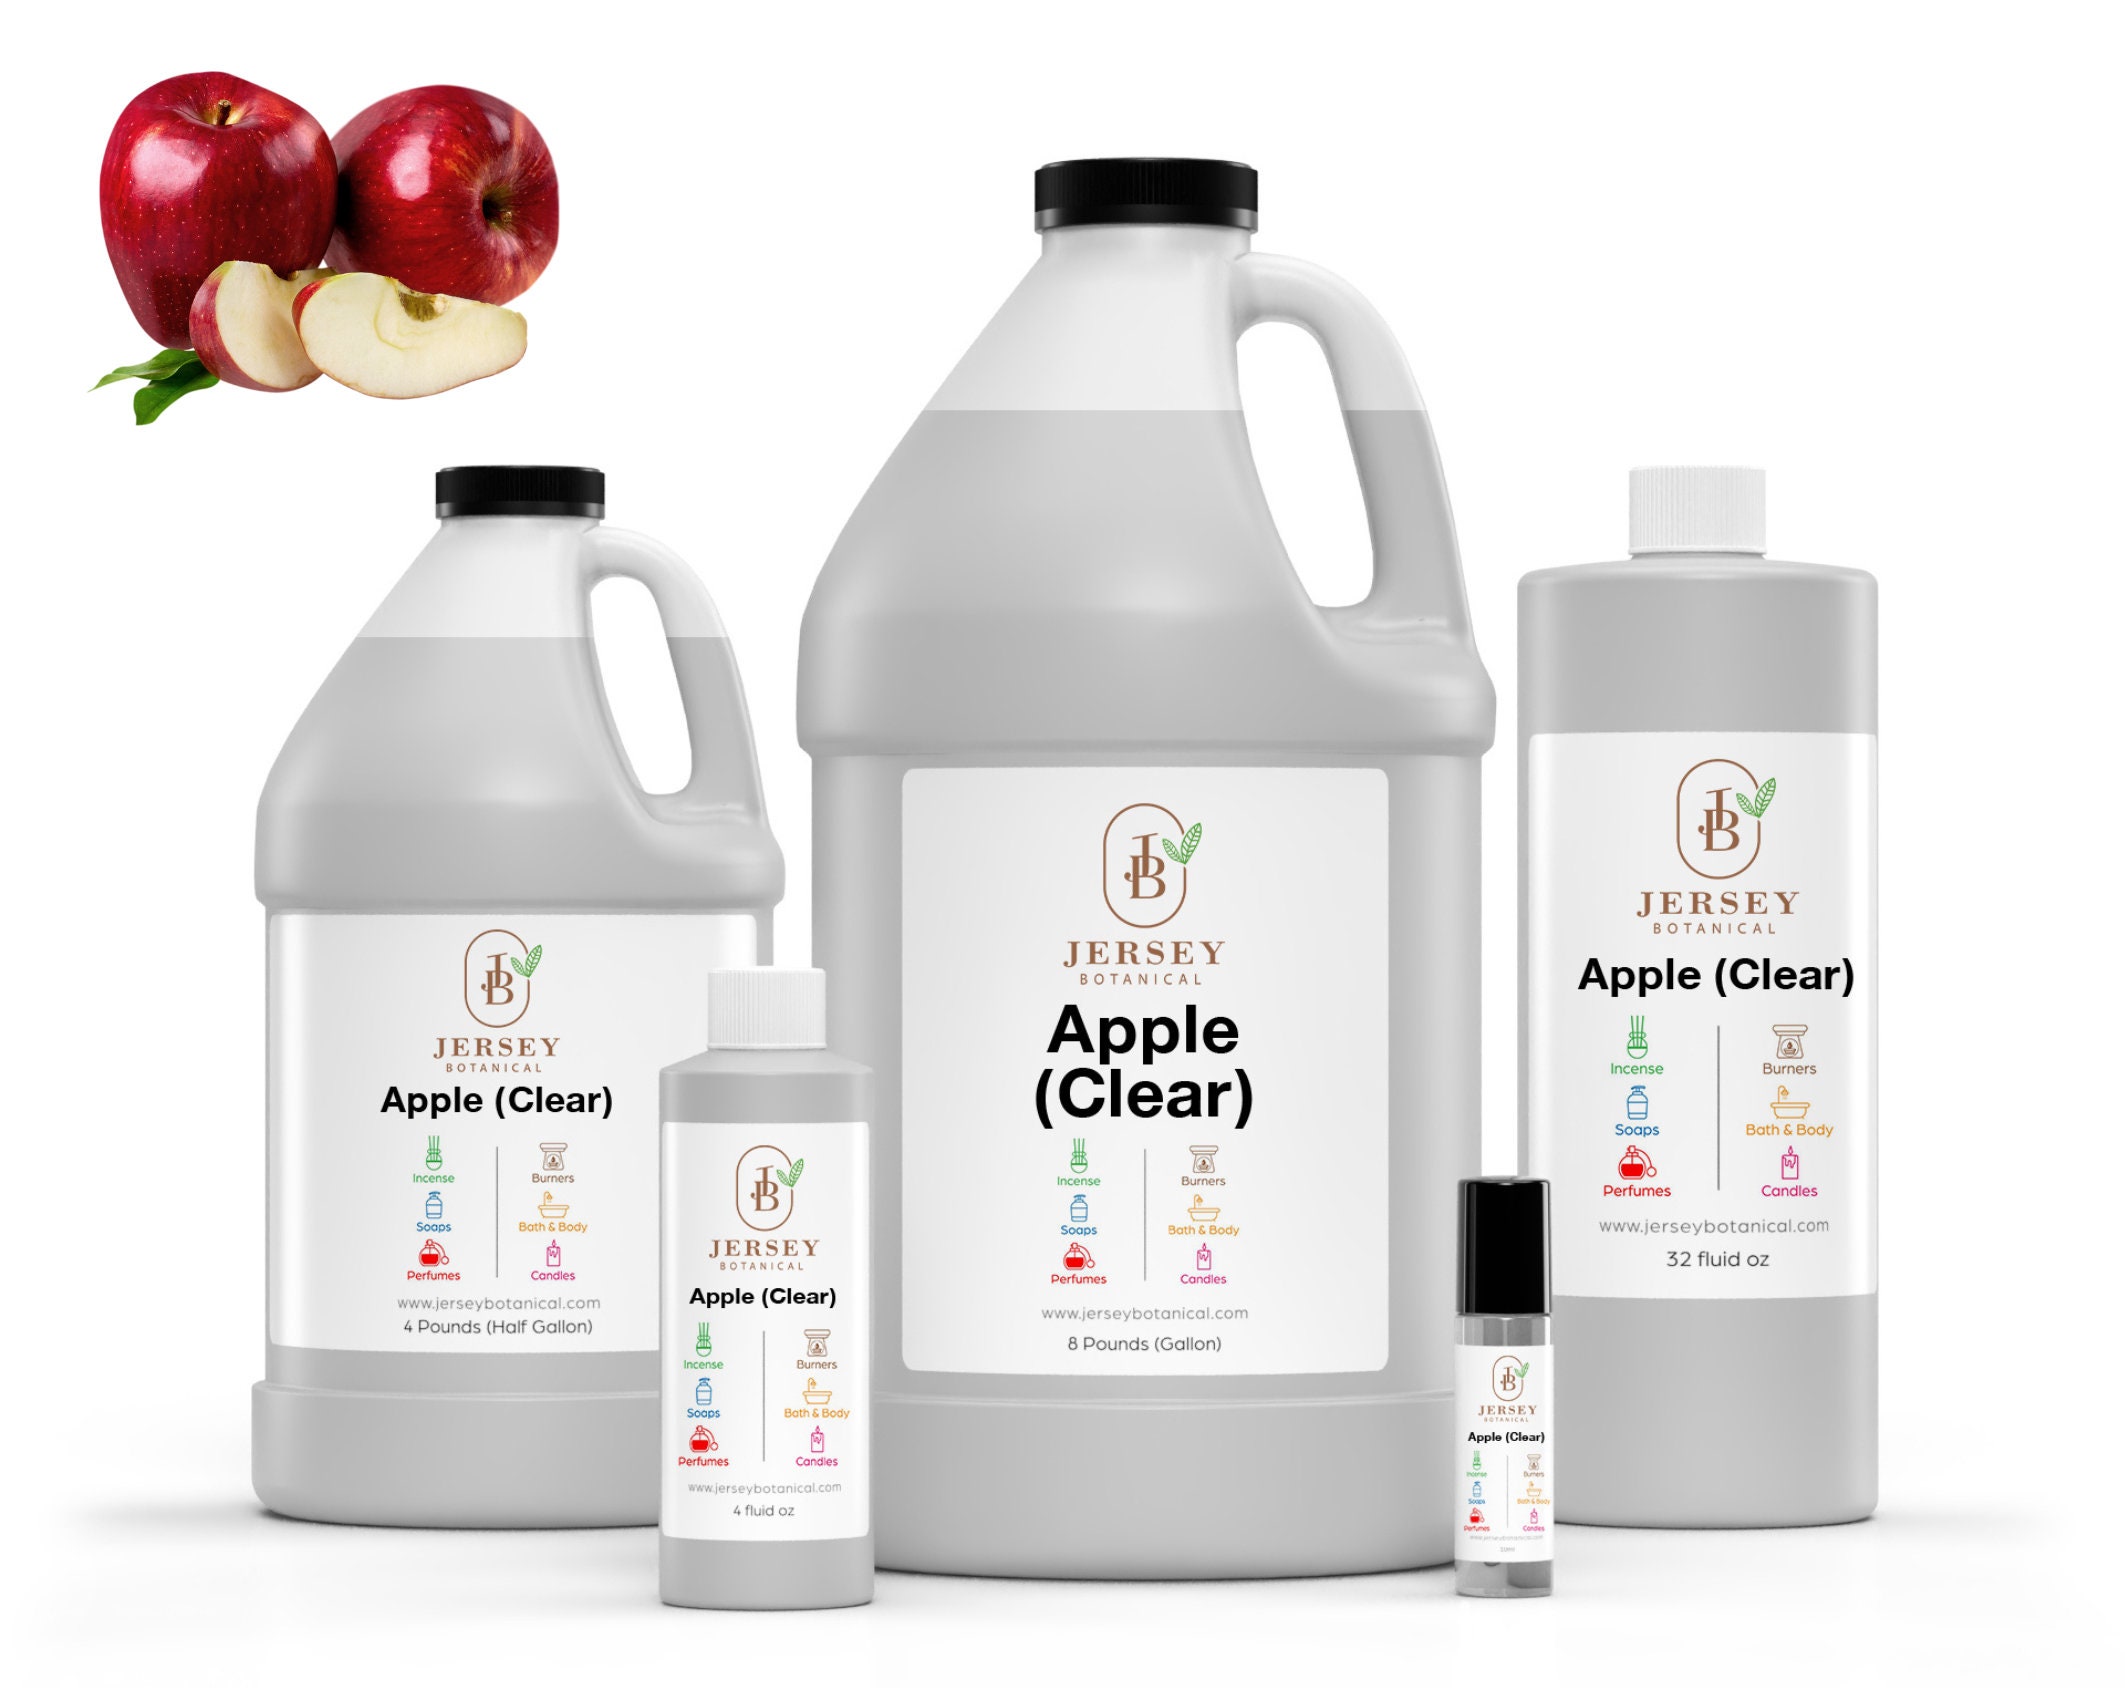 Apple (Clear) Fragrance Oil Scented Oils For Body, Soap Making